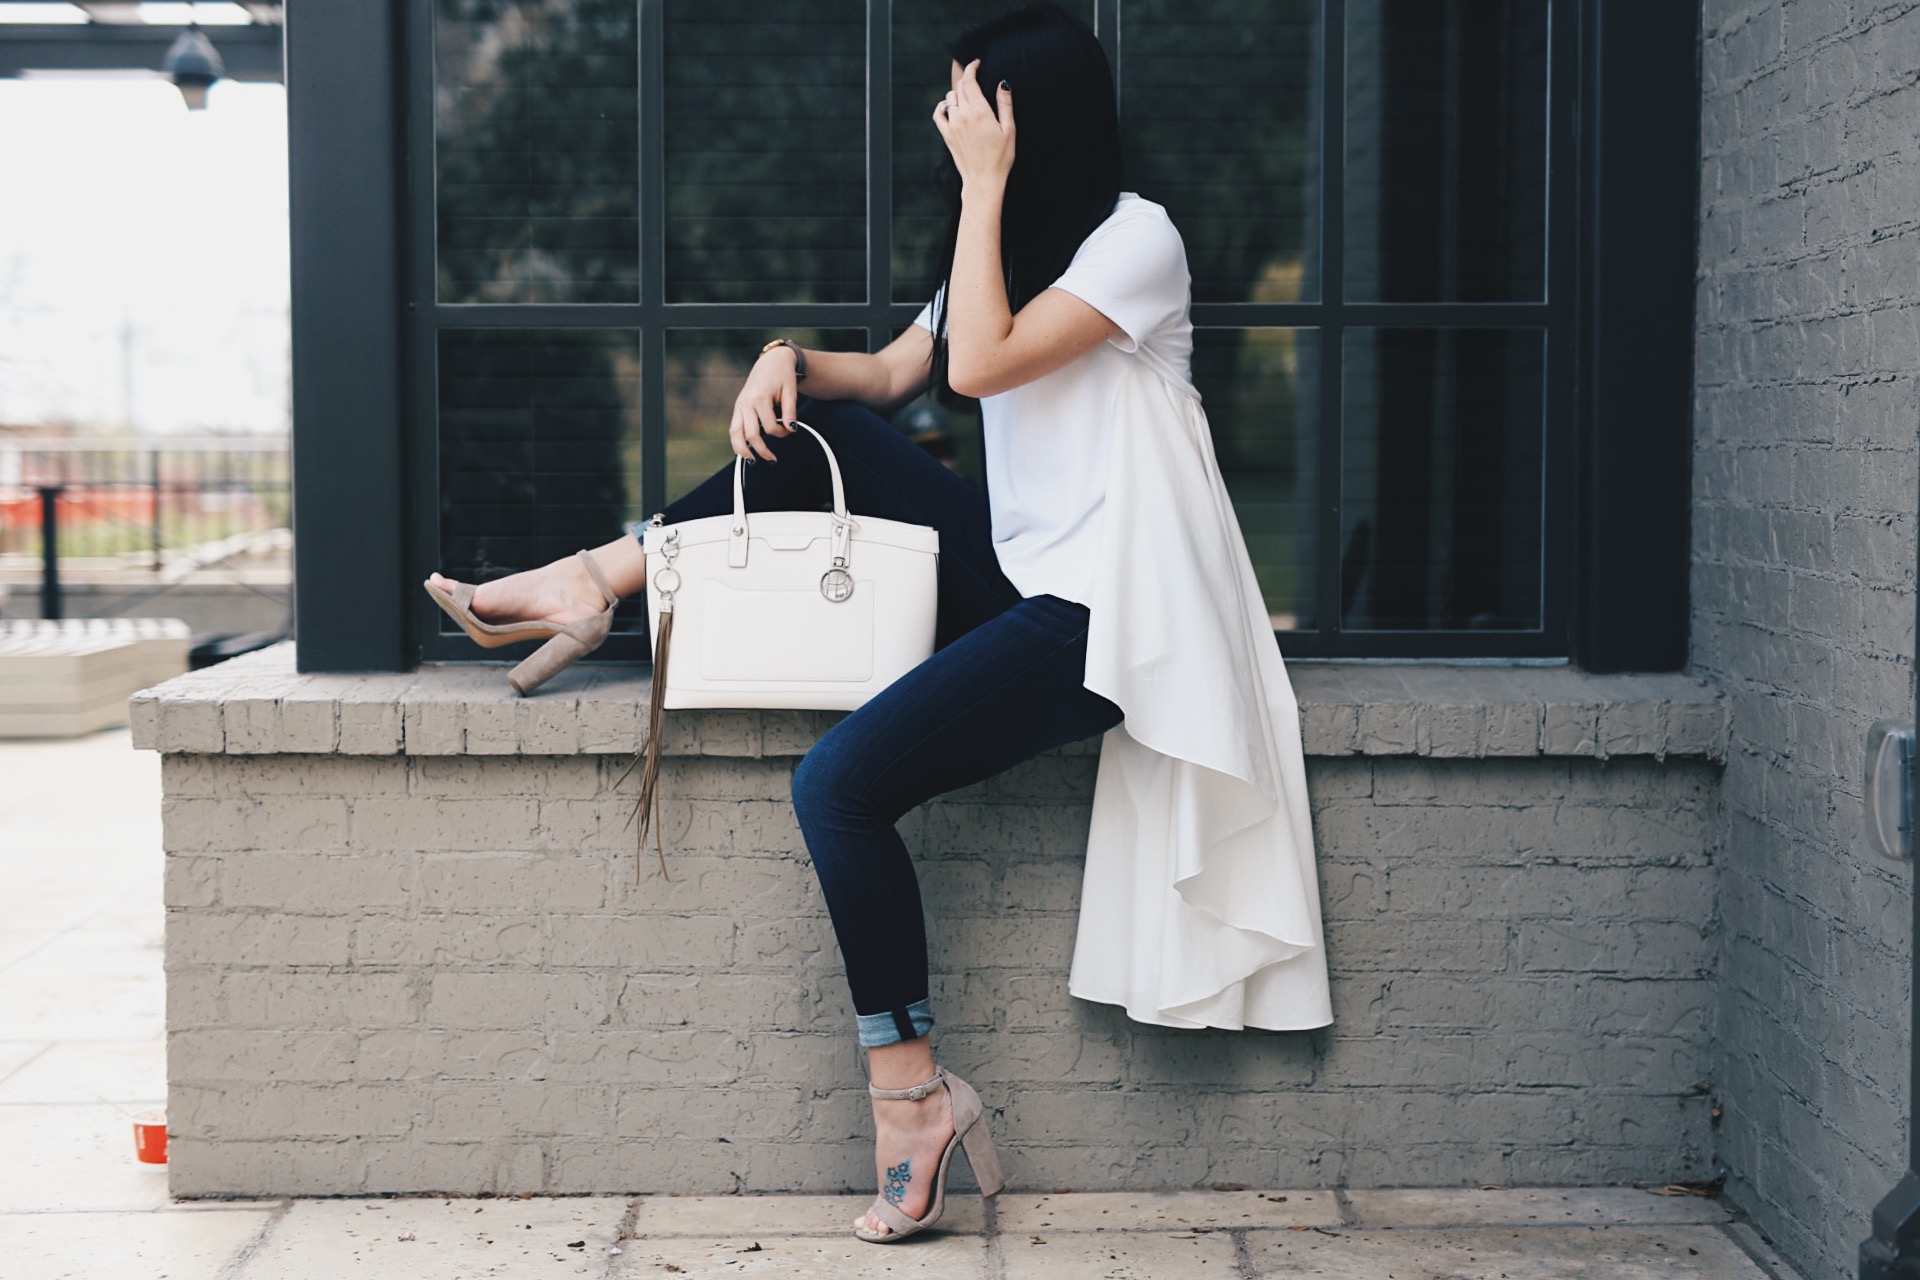 DTK Austin is celebrating her 31st birthday by sharing 31 facts about her life. Click for more outfit details - Blouse from Red Dress Boutique, Steve Madden heels, Articles of Society Jeans with a Henri Bendel Bag.